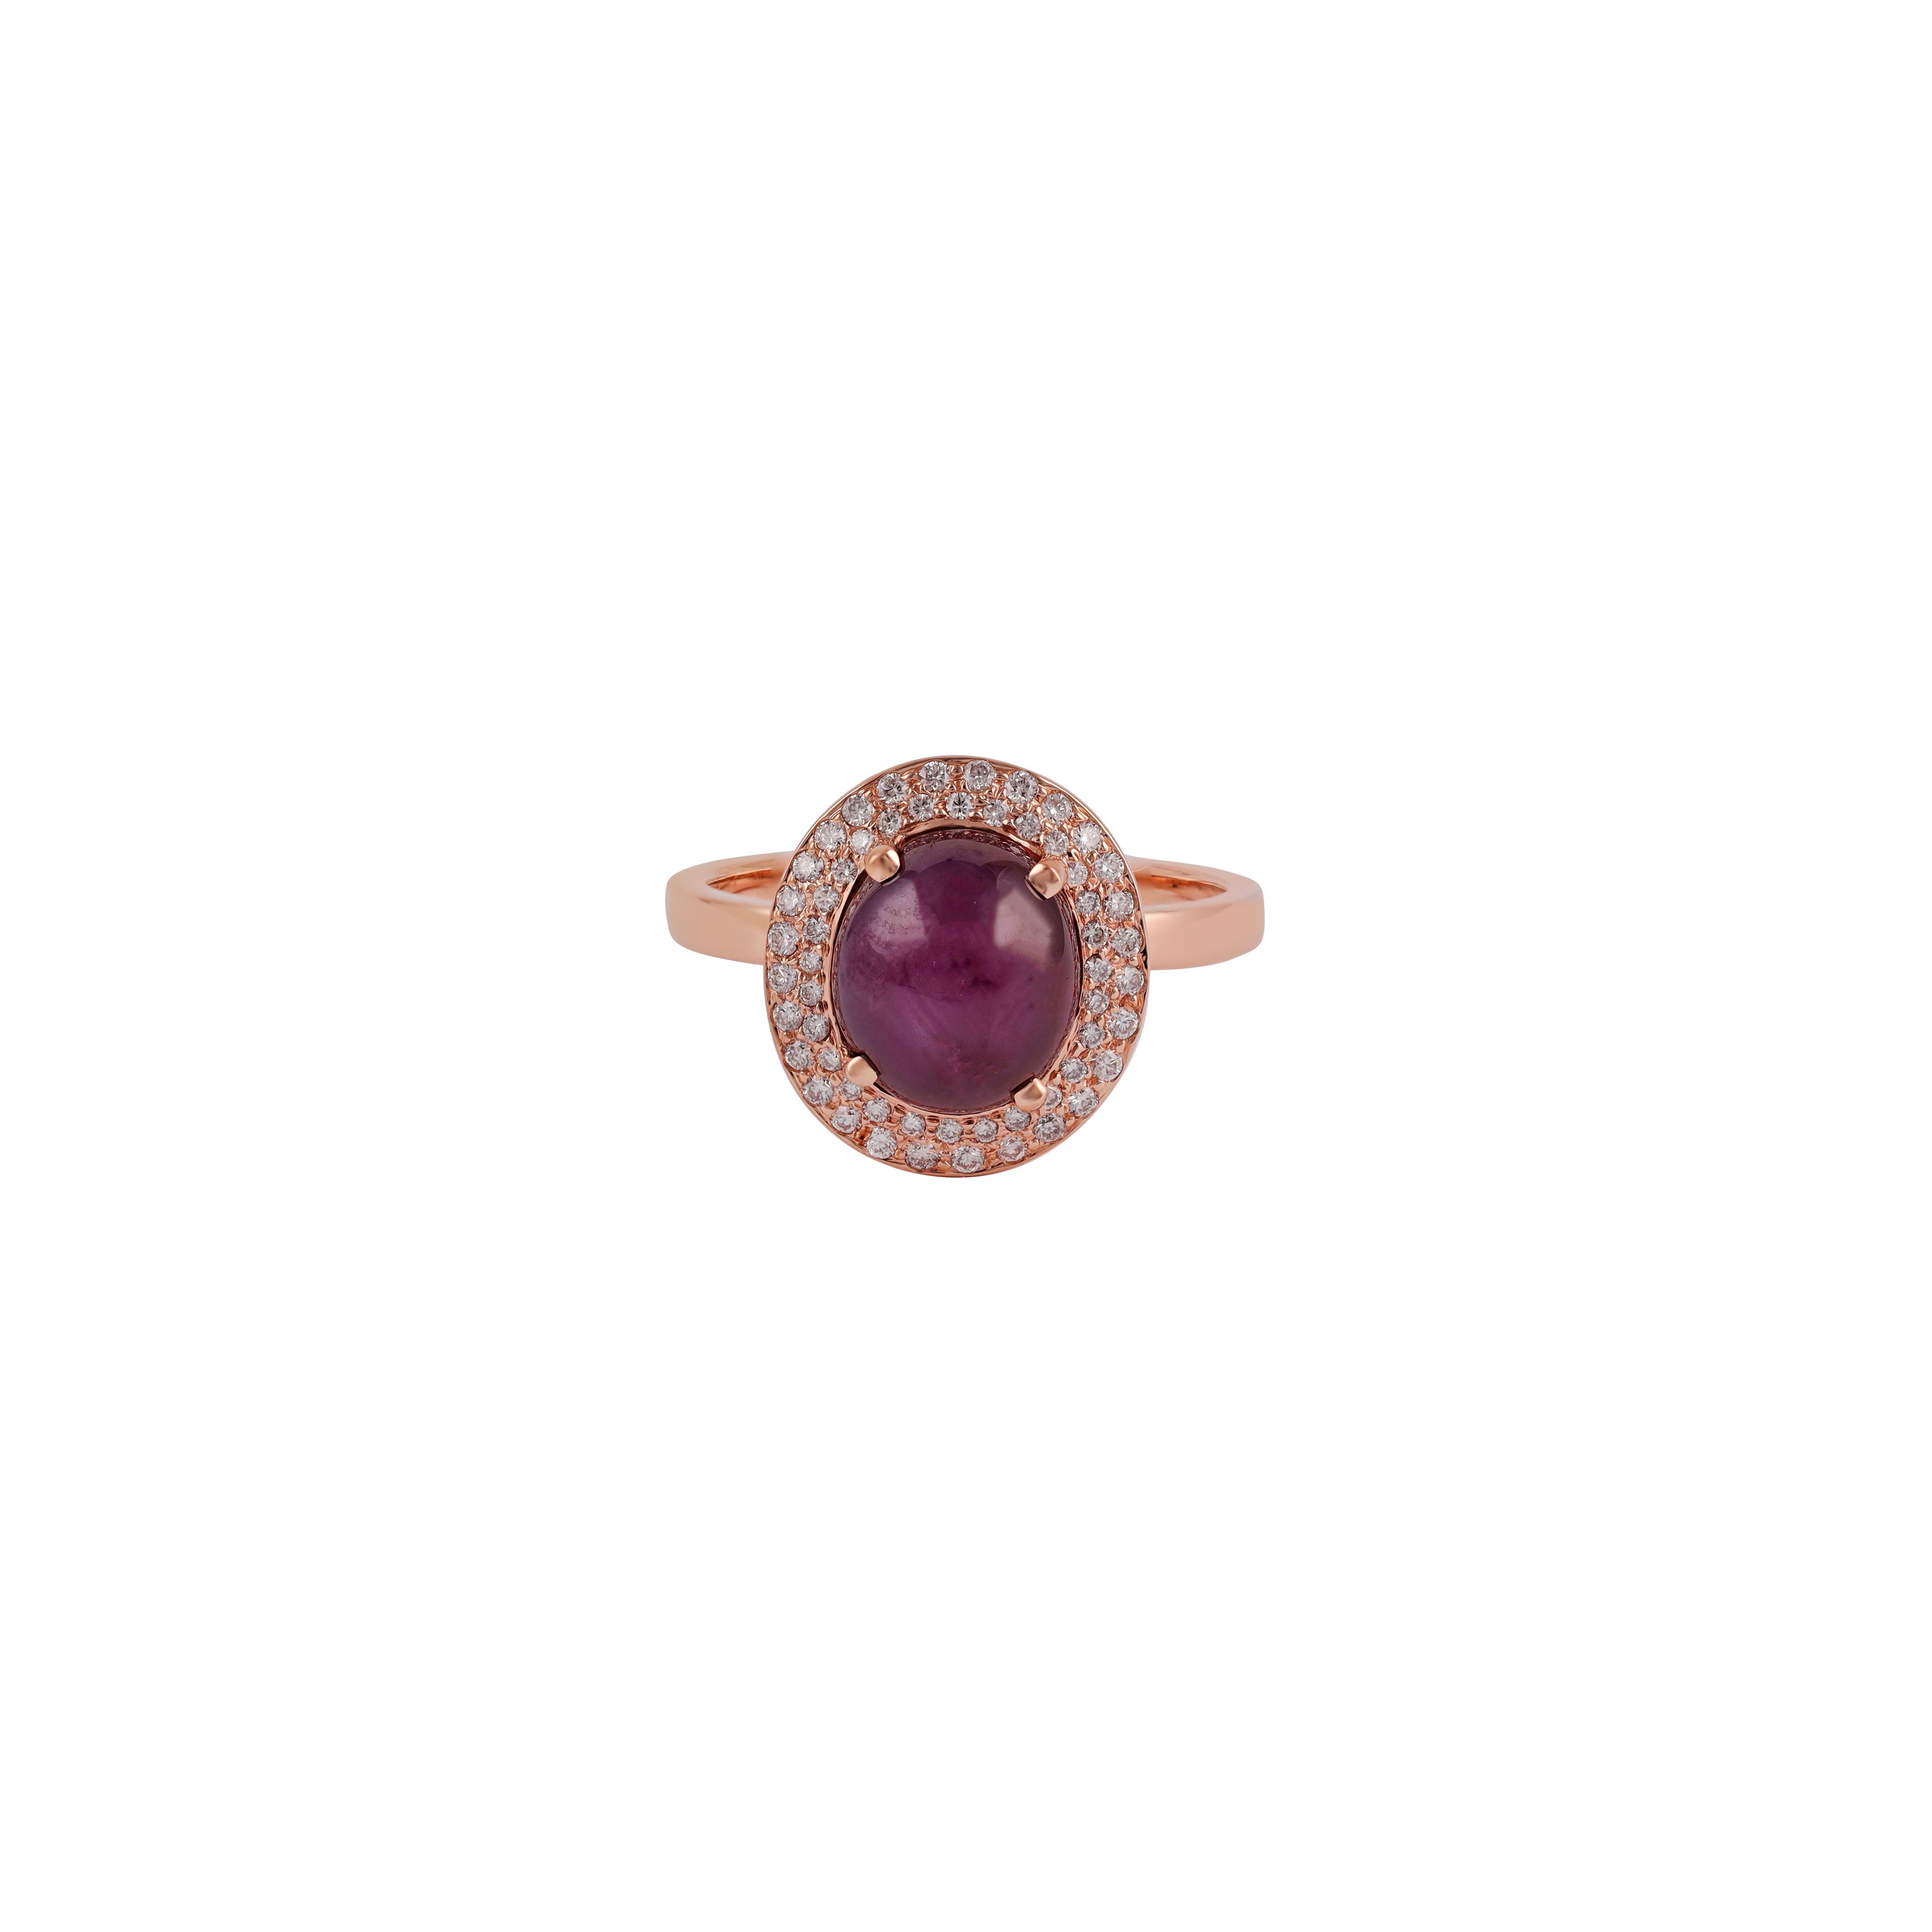 Star Ruby Ring Come Pendant Necklace in 18K Rose Gold.
Accessorize your look with this elegant Star Ruby Ring Come Pendant necklace. This stunning piece of jewelry instantly elevates a casual look or dressy outfit. Comfortable and easy to wear, it